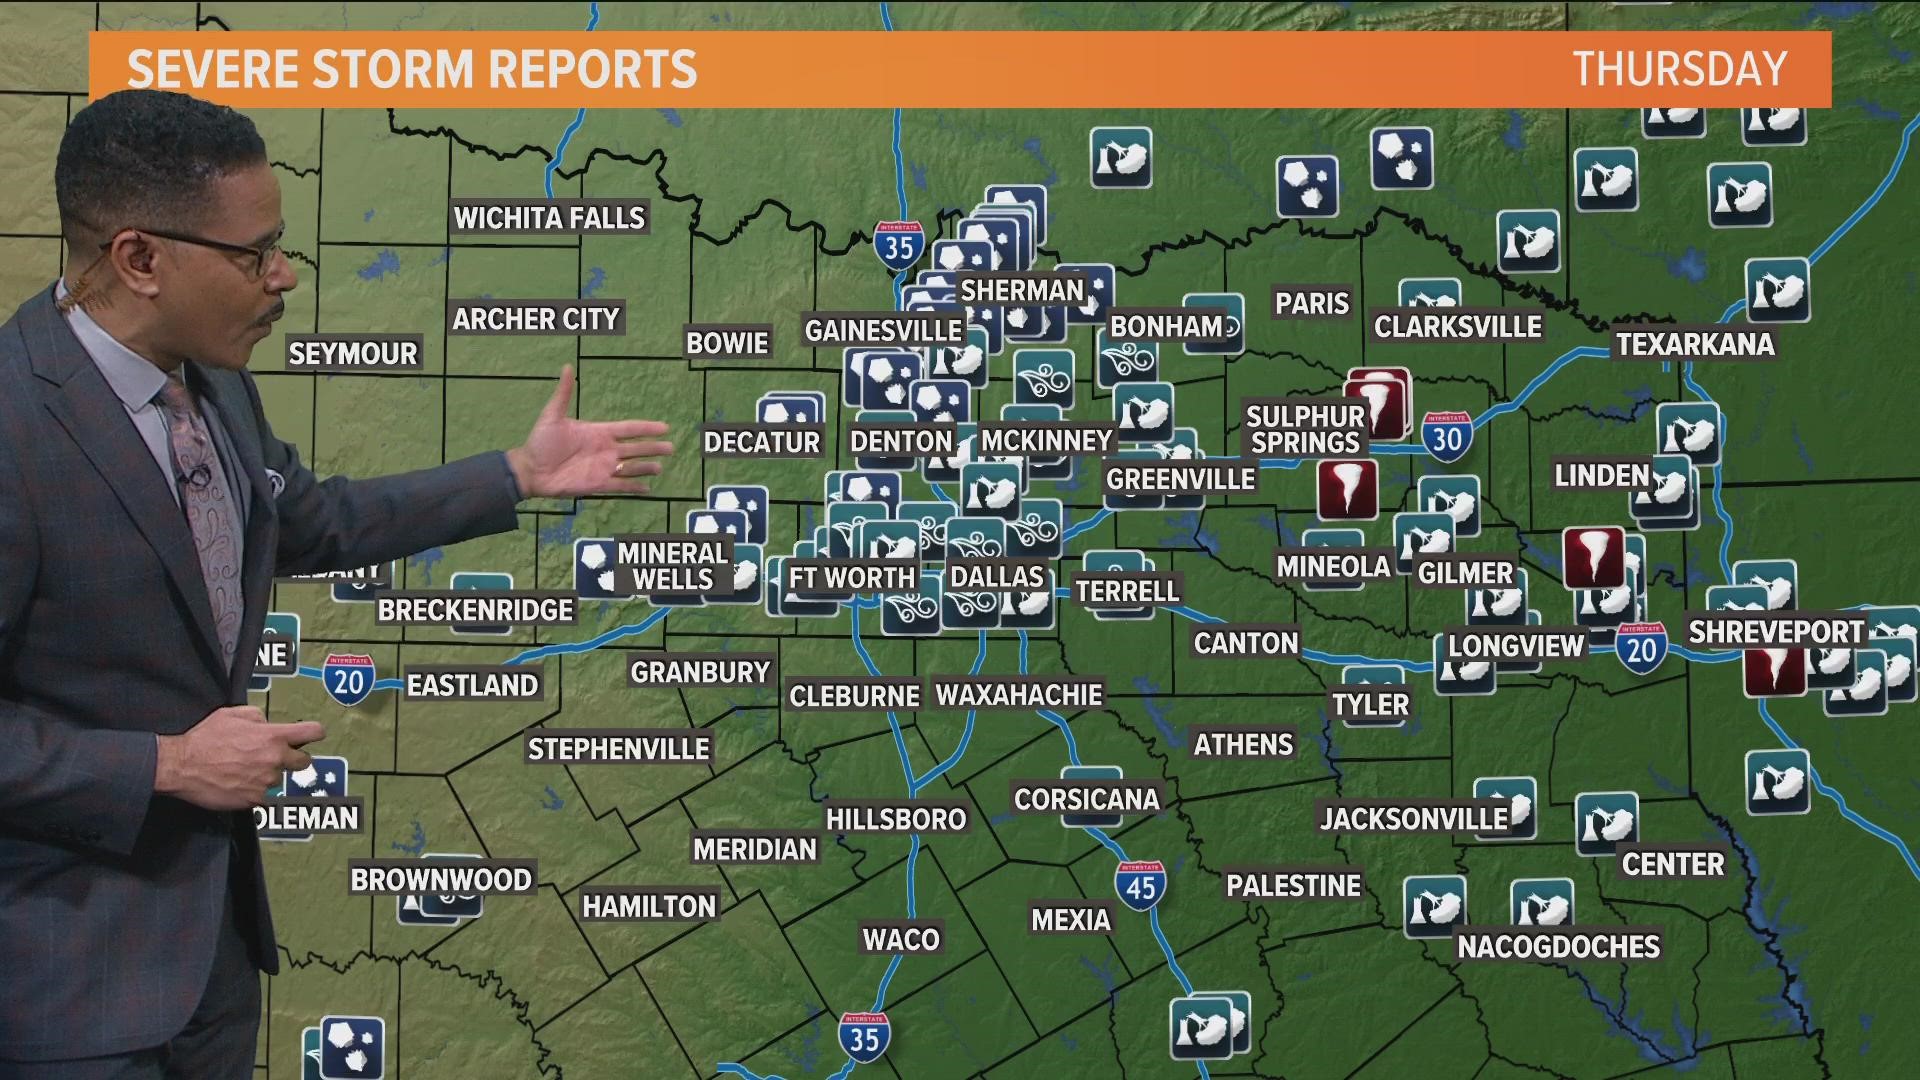 Greg Fields runs through the wind, hail and tornado reports we saw during Thursday night's severe storms.